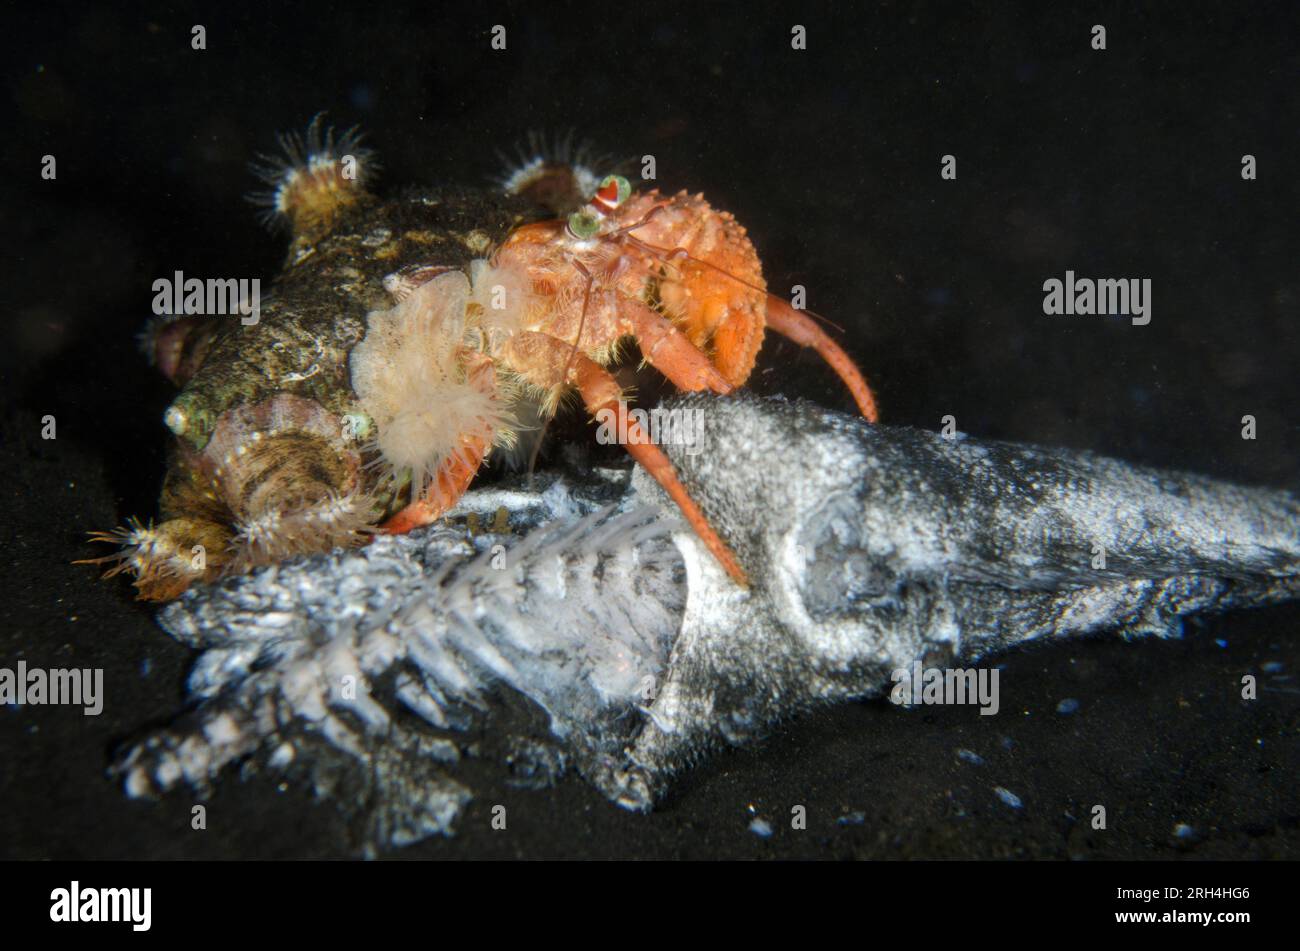 Anemone Hermit Crab, Dardanus pedunculatus, with anemones, Calliactis polypus, on shell for camouflage and protection scavenging dead fish, night dive Stock Photo